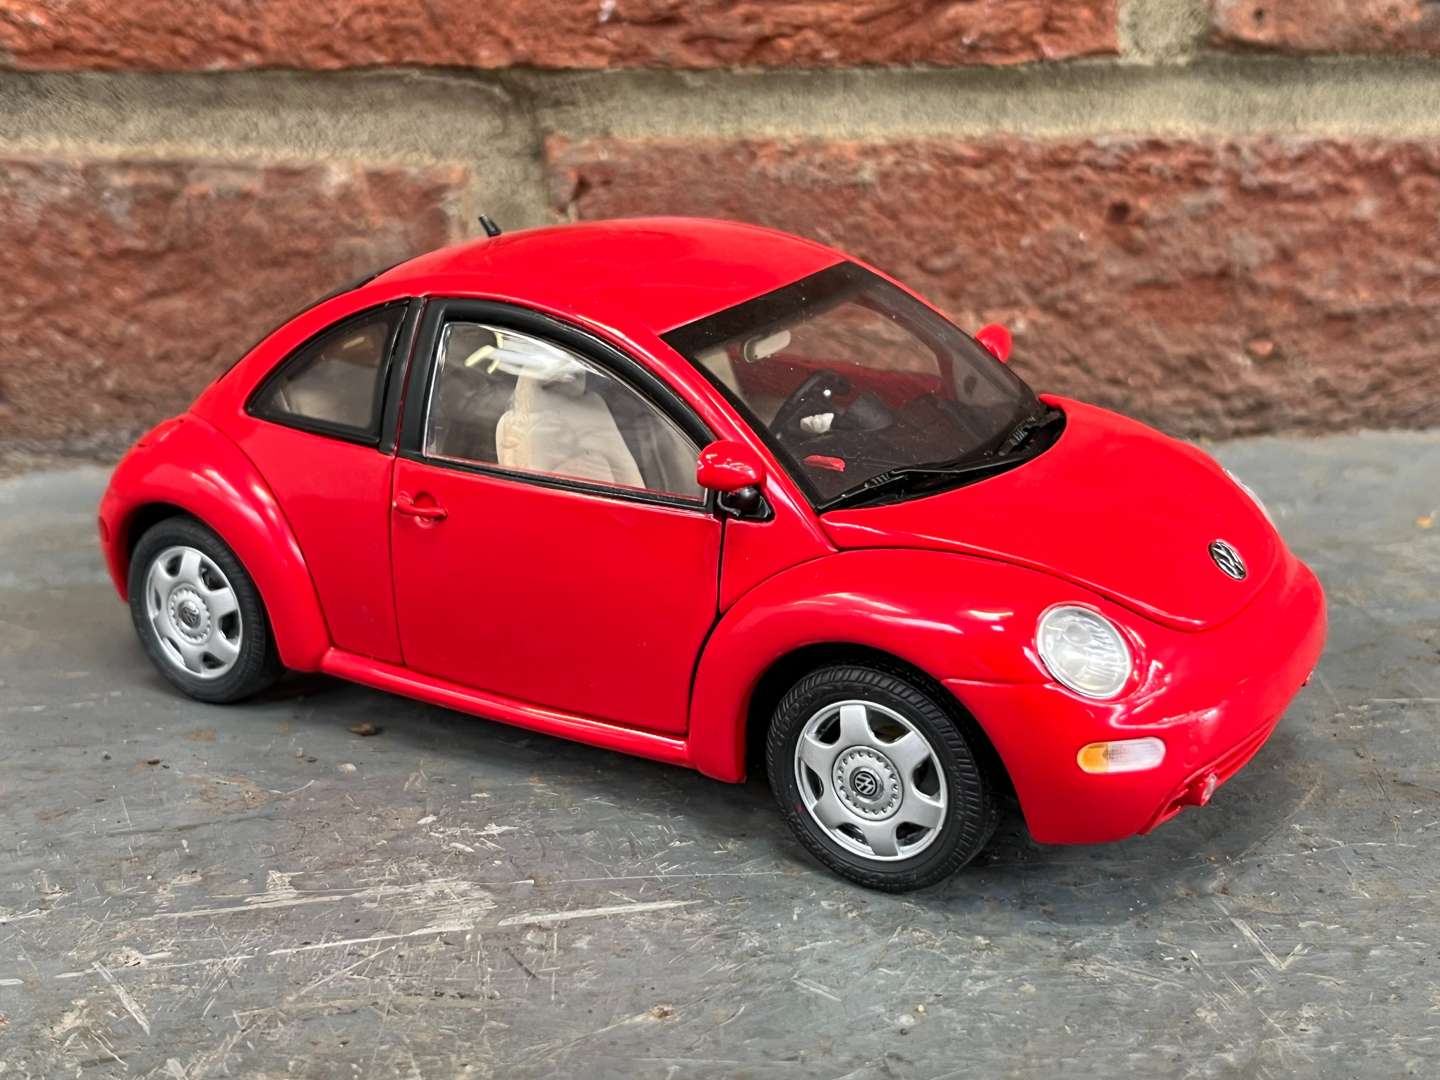 <p>VW Beetle and Convertible Beetle Model Car By Franklin Mint&nbsp;(2)</p>